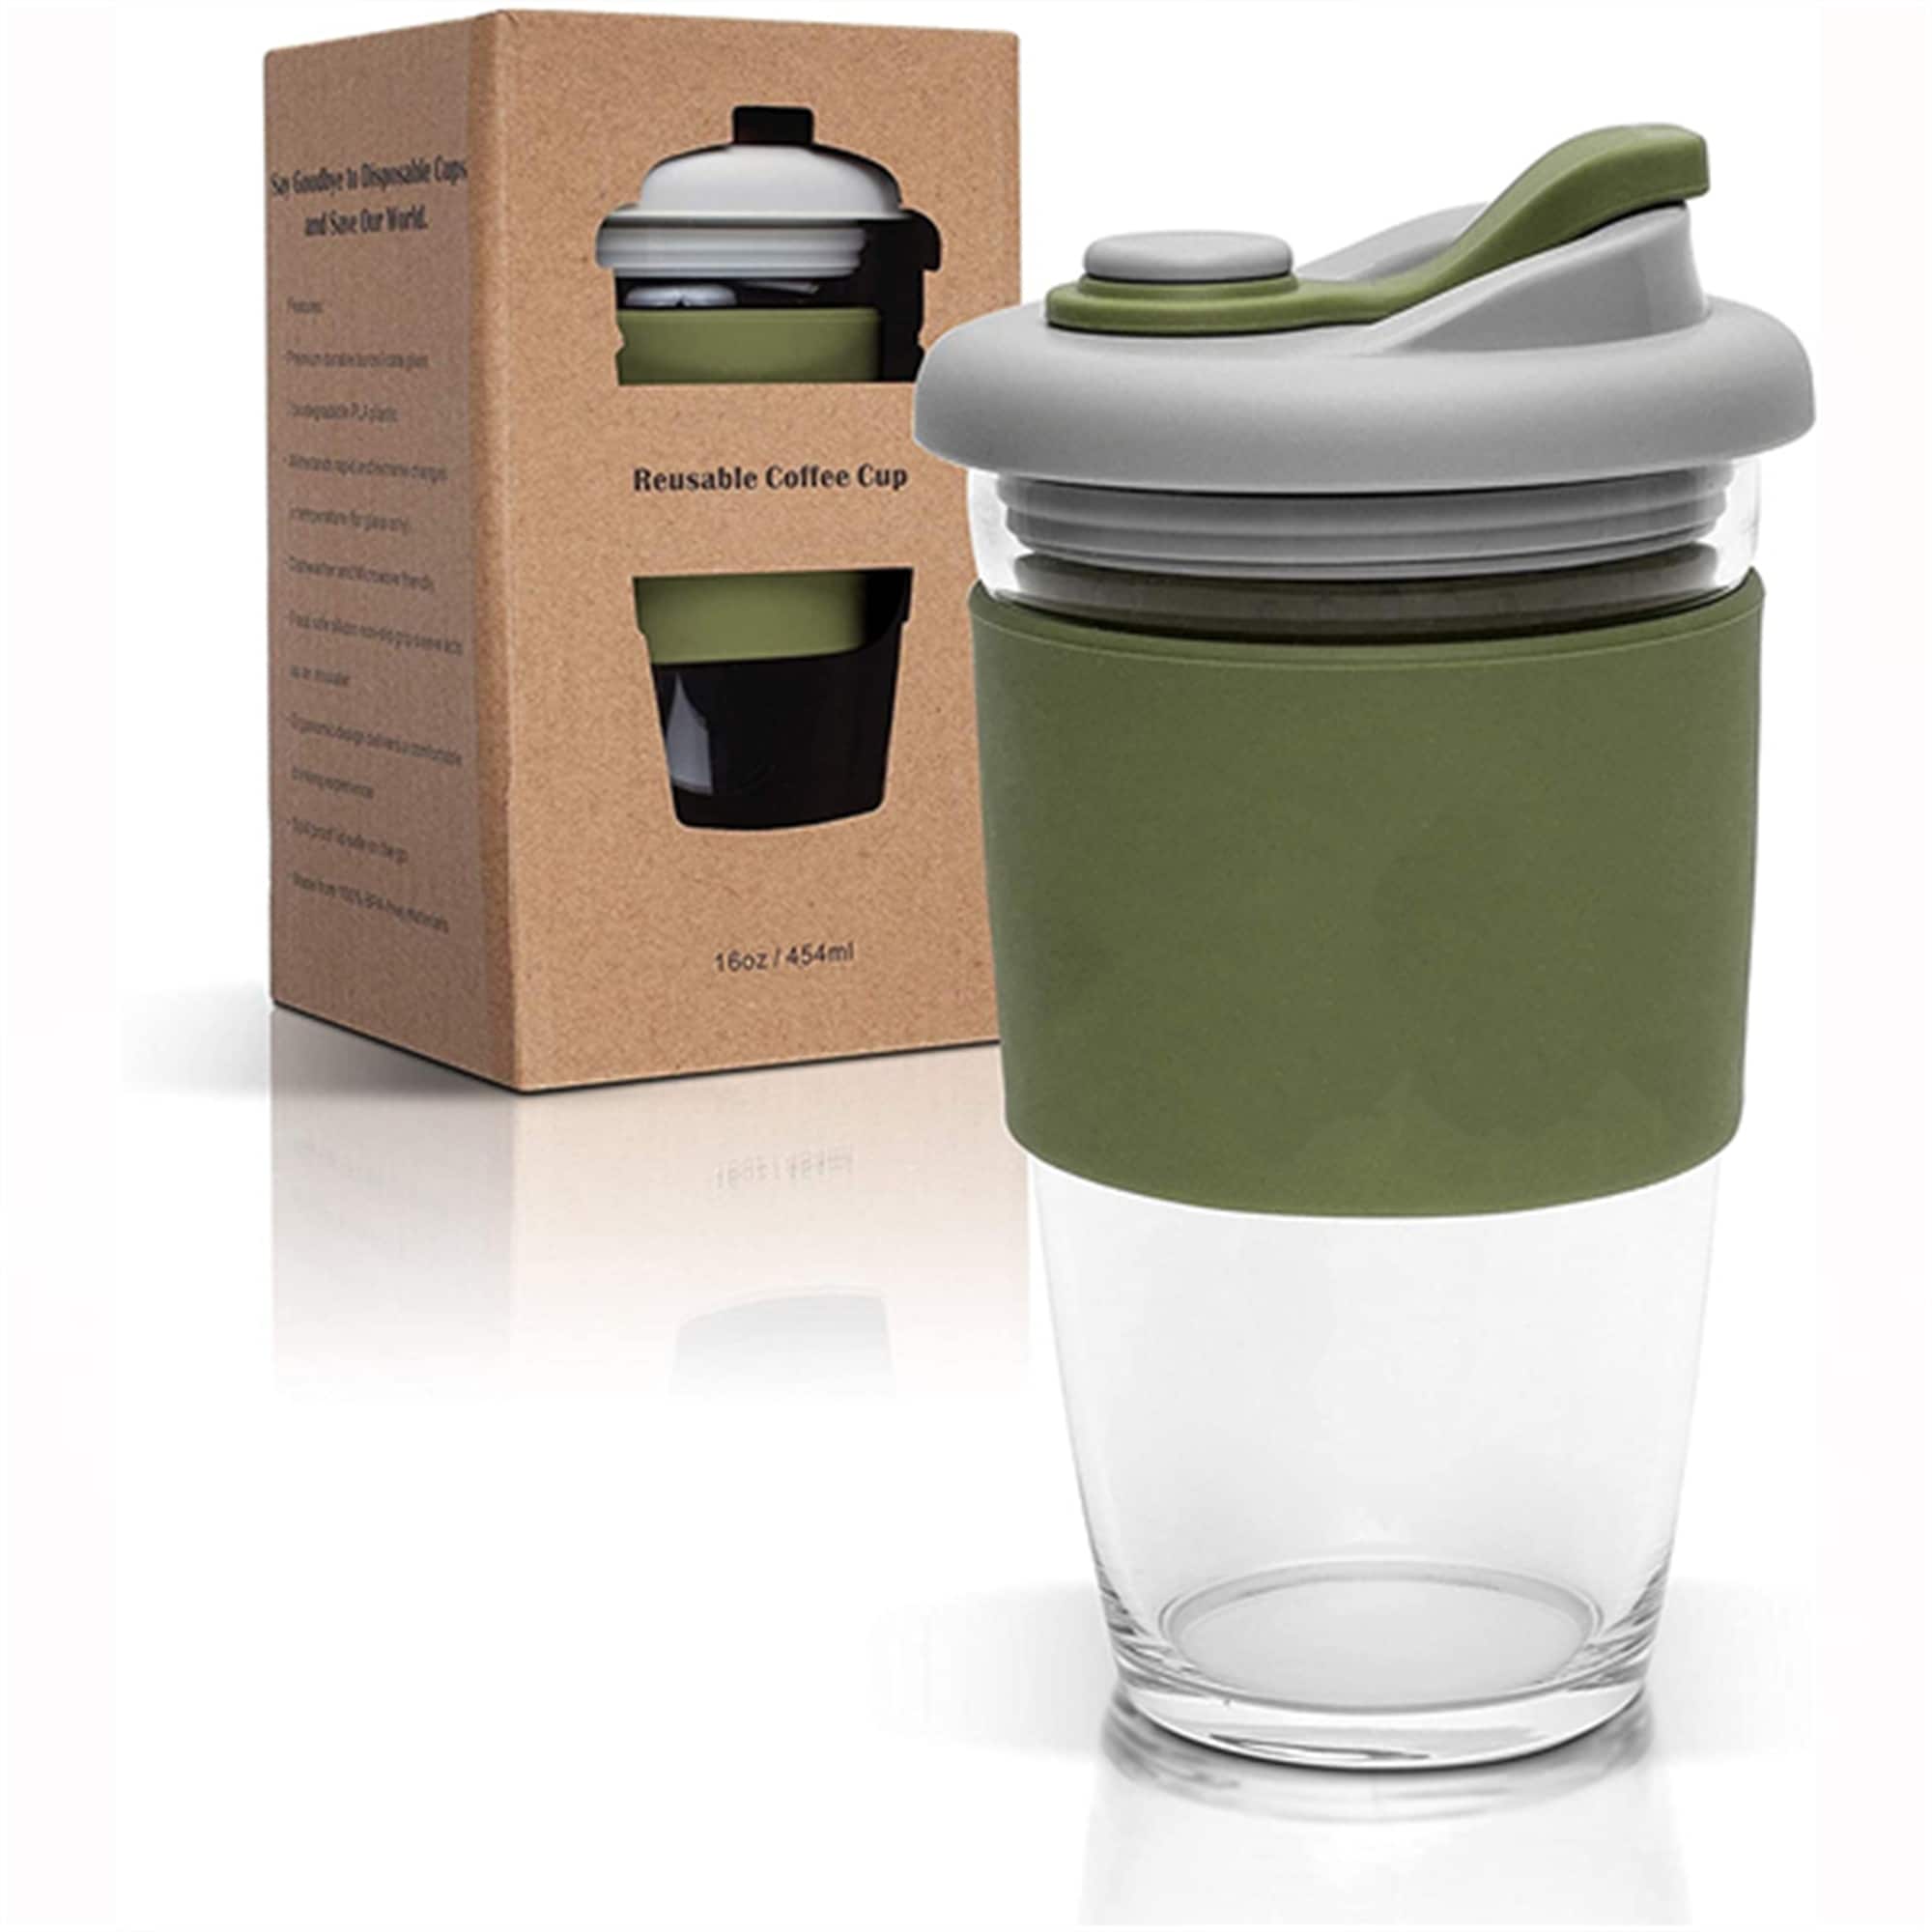 https://ak1.ostkcdn.com/images/products/is/images/direct/df7752094e4f0861f61bed5a13cec34ac171844c/The-Reusable-Glass-Coffee-Cup%2C-ToGo-Travel-Coffee-Mug-with-Lid-and-Silicone-Sleeve%2C-Dishwasher-and-Microwave-Safe.jpg